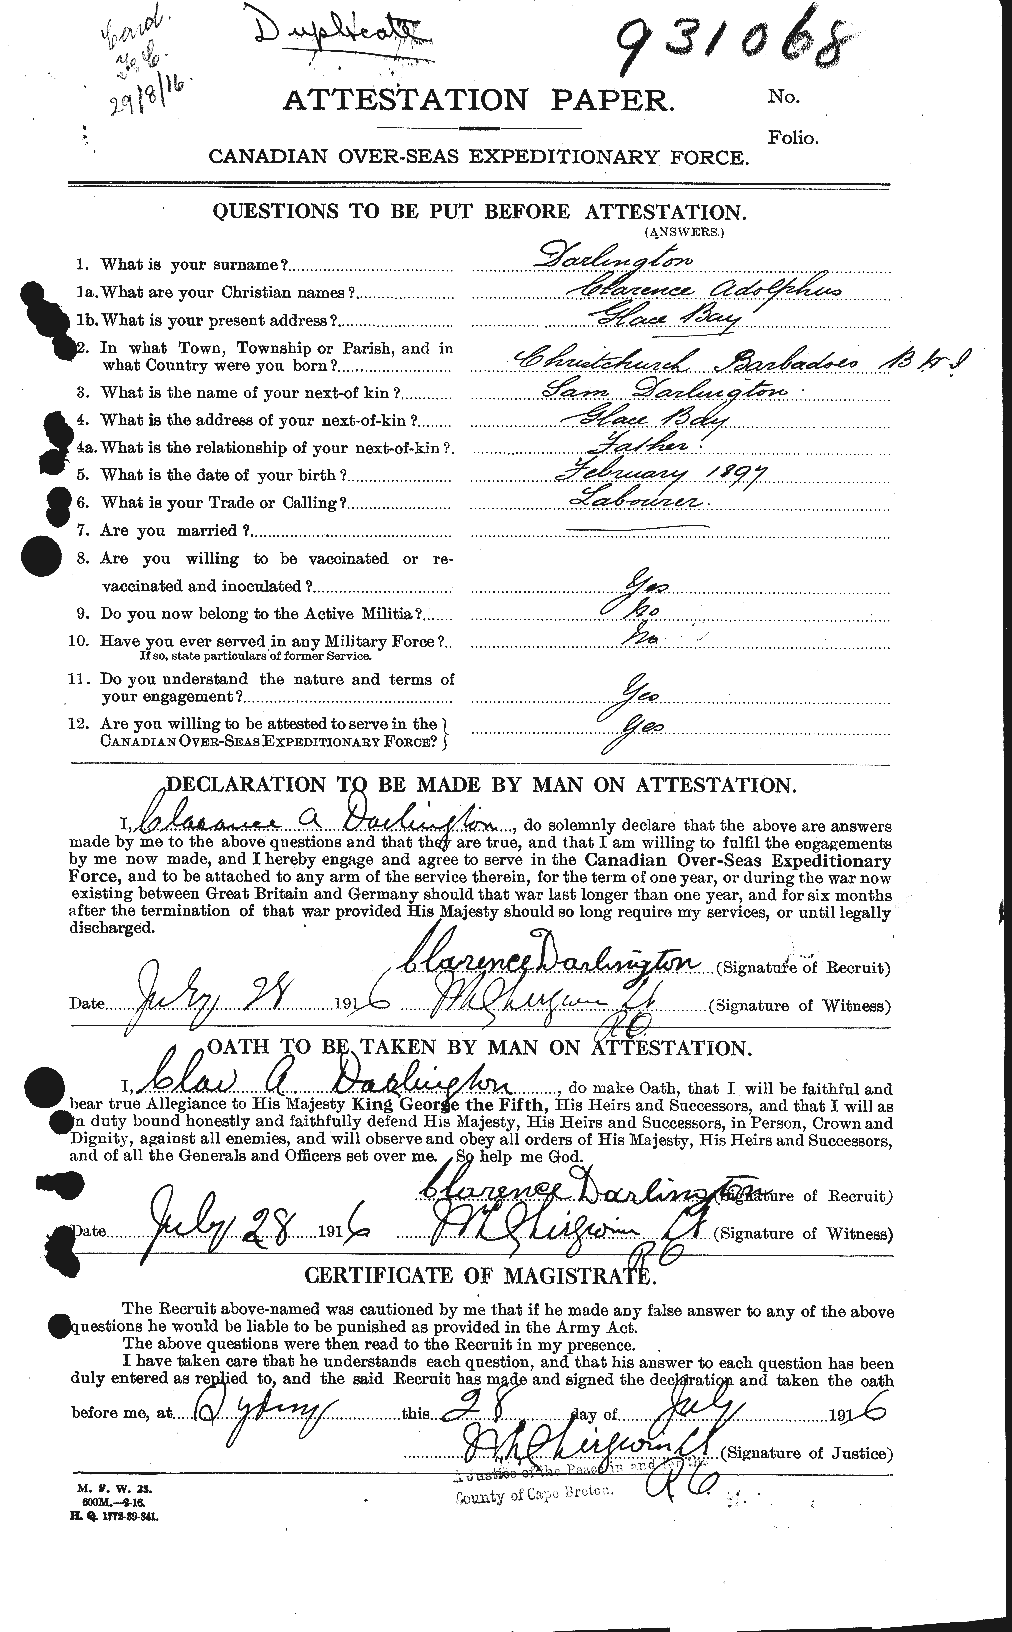 Personnel Records of the First World War - CEF 280257a